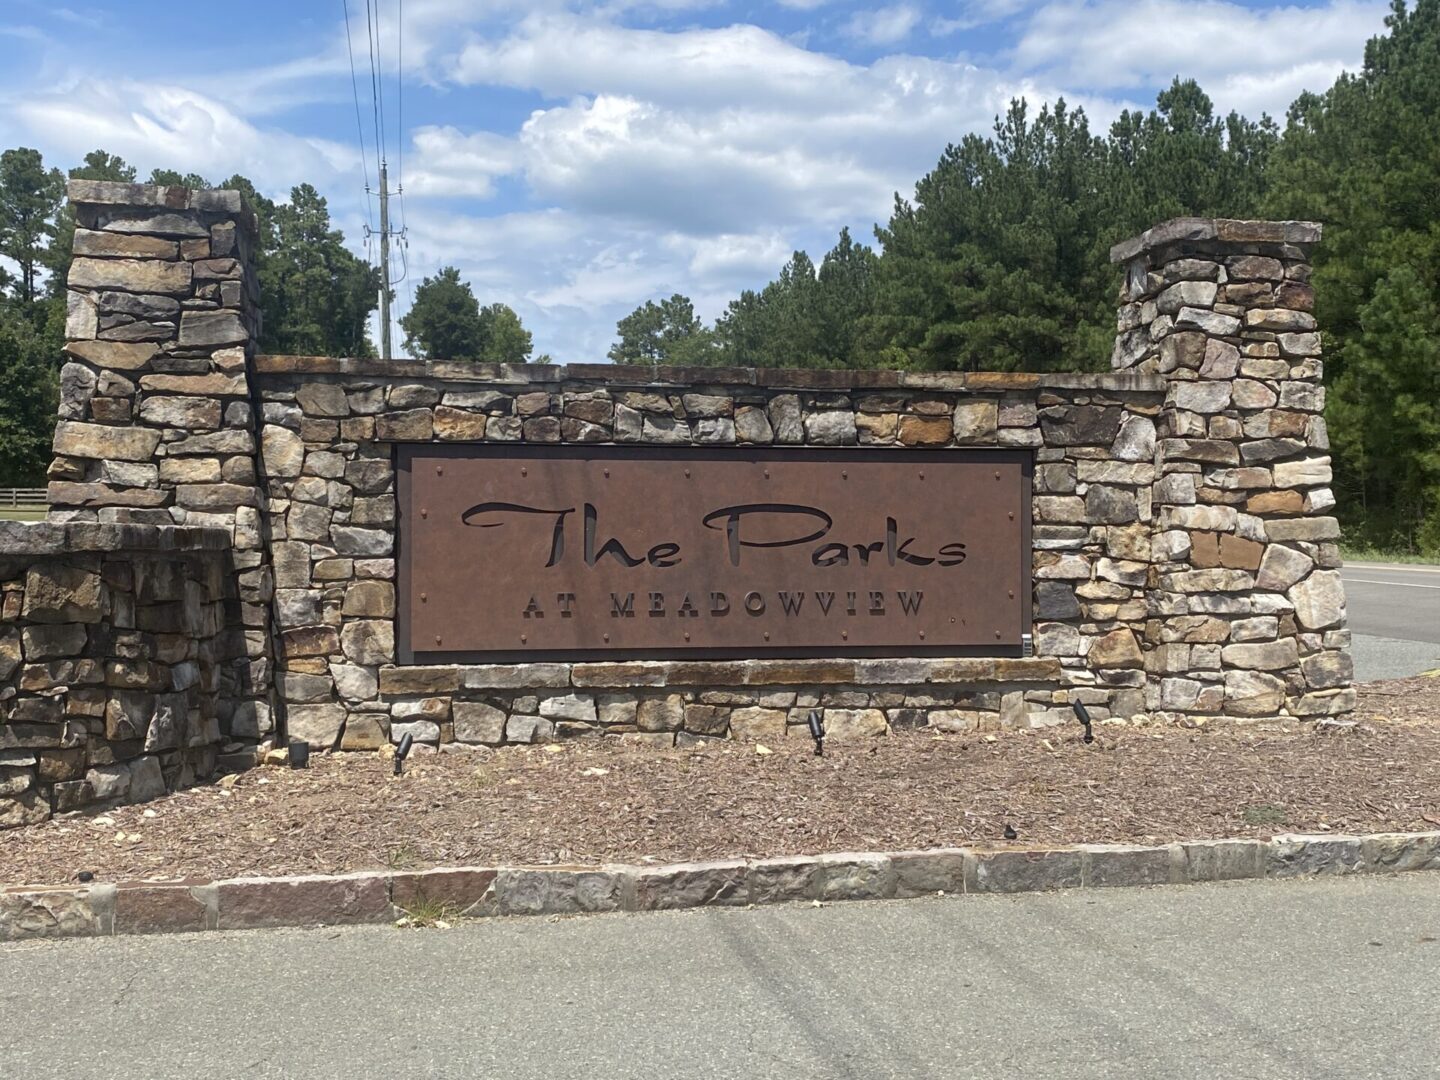 The Name Plate of The Parks at Meadow view